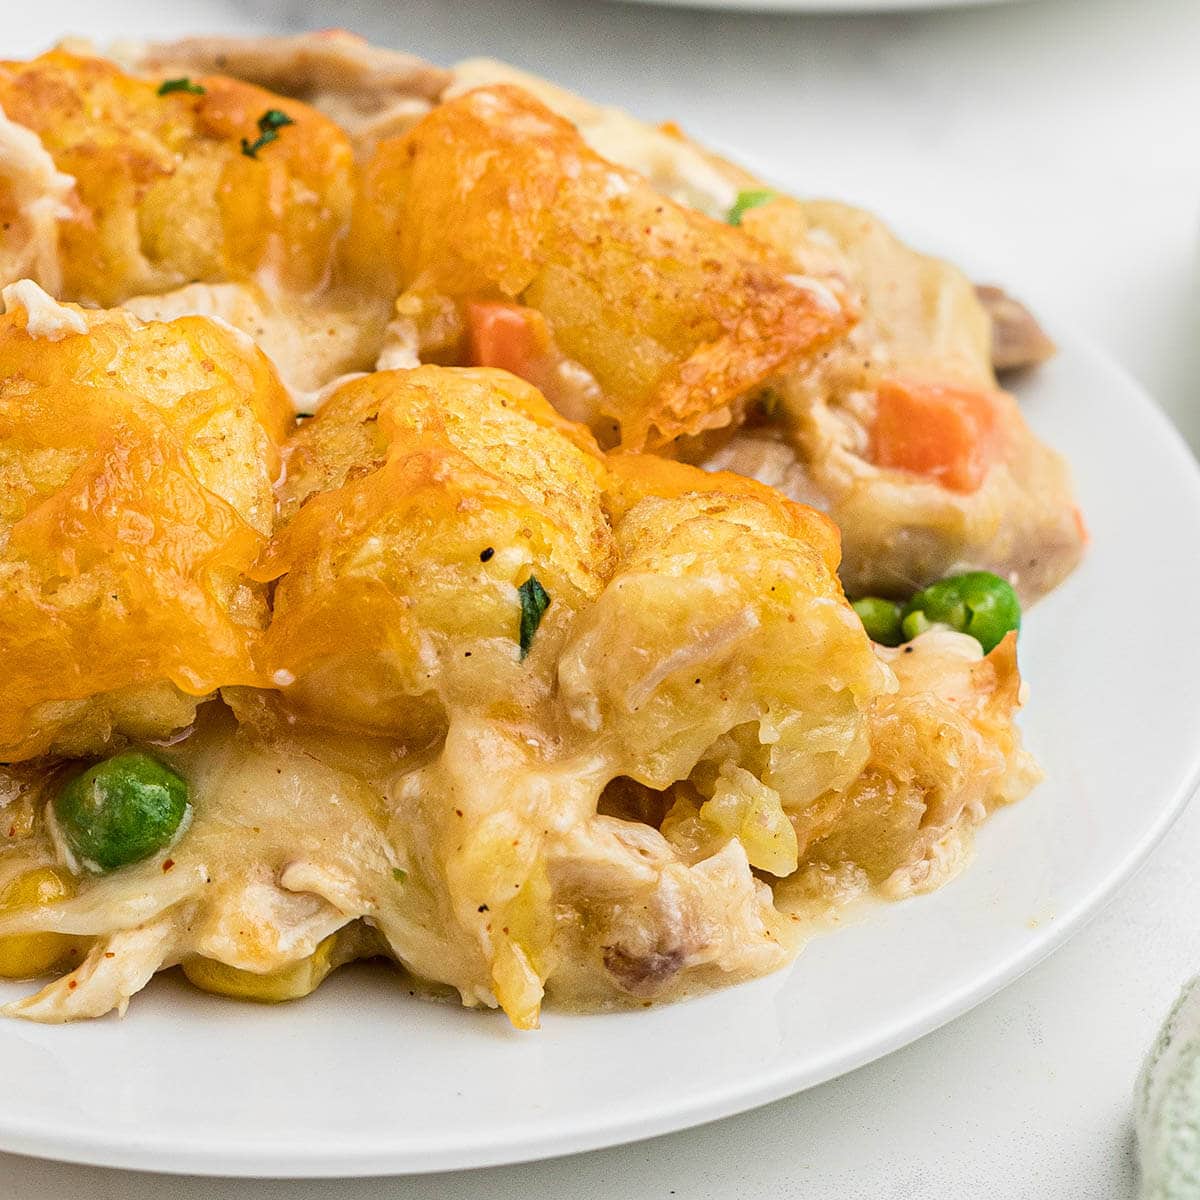 Tater Tot Casserole on plate.